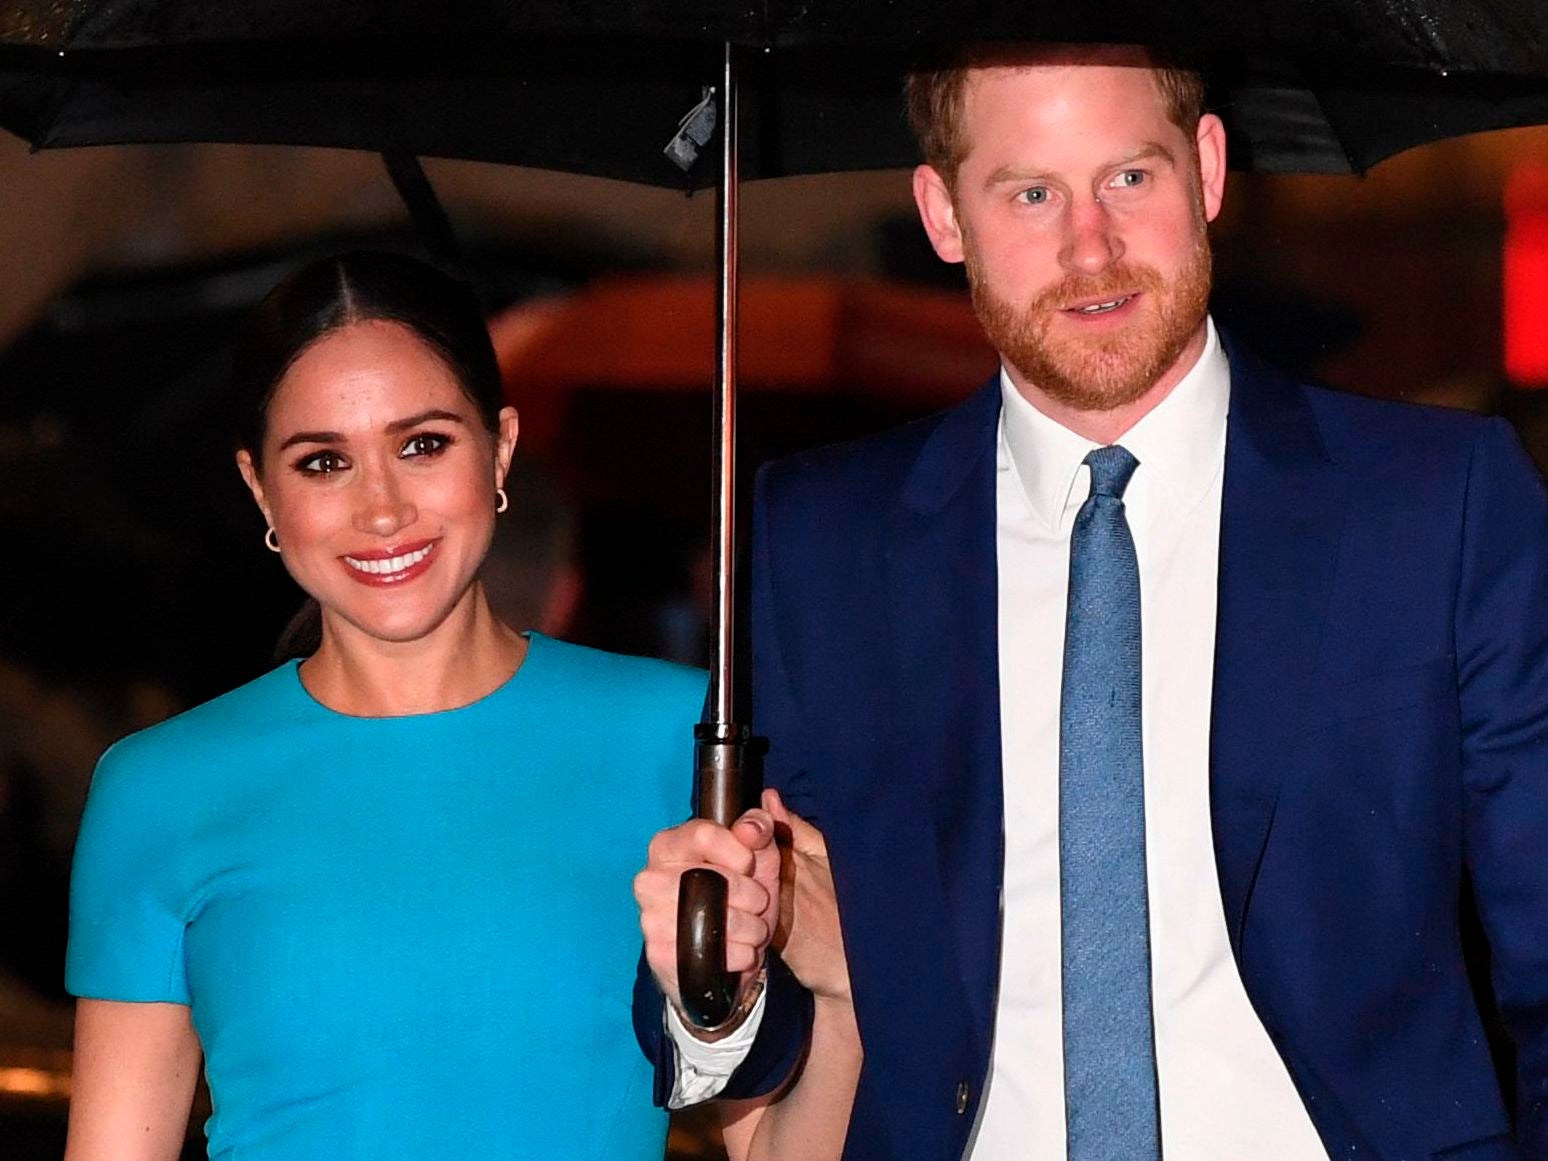 The Sussexes have distanced themselves from the book